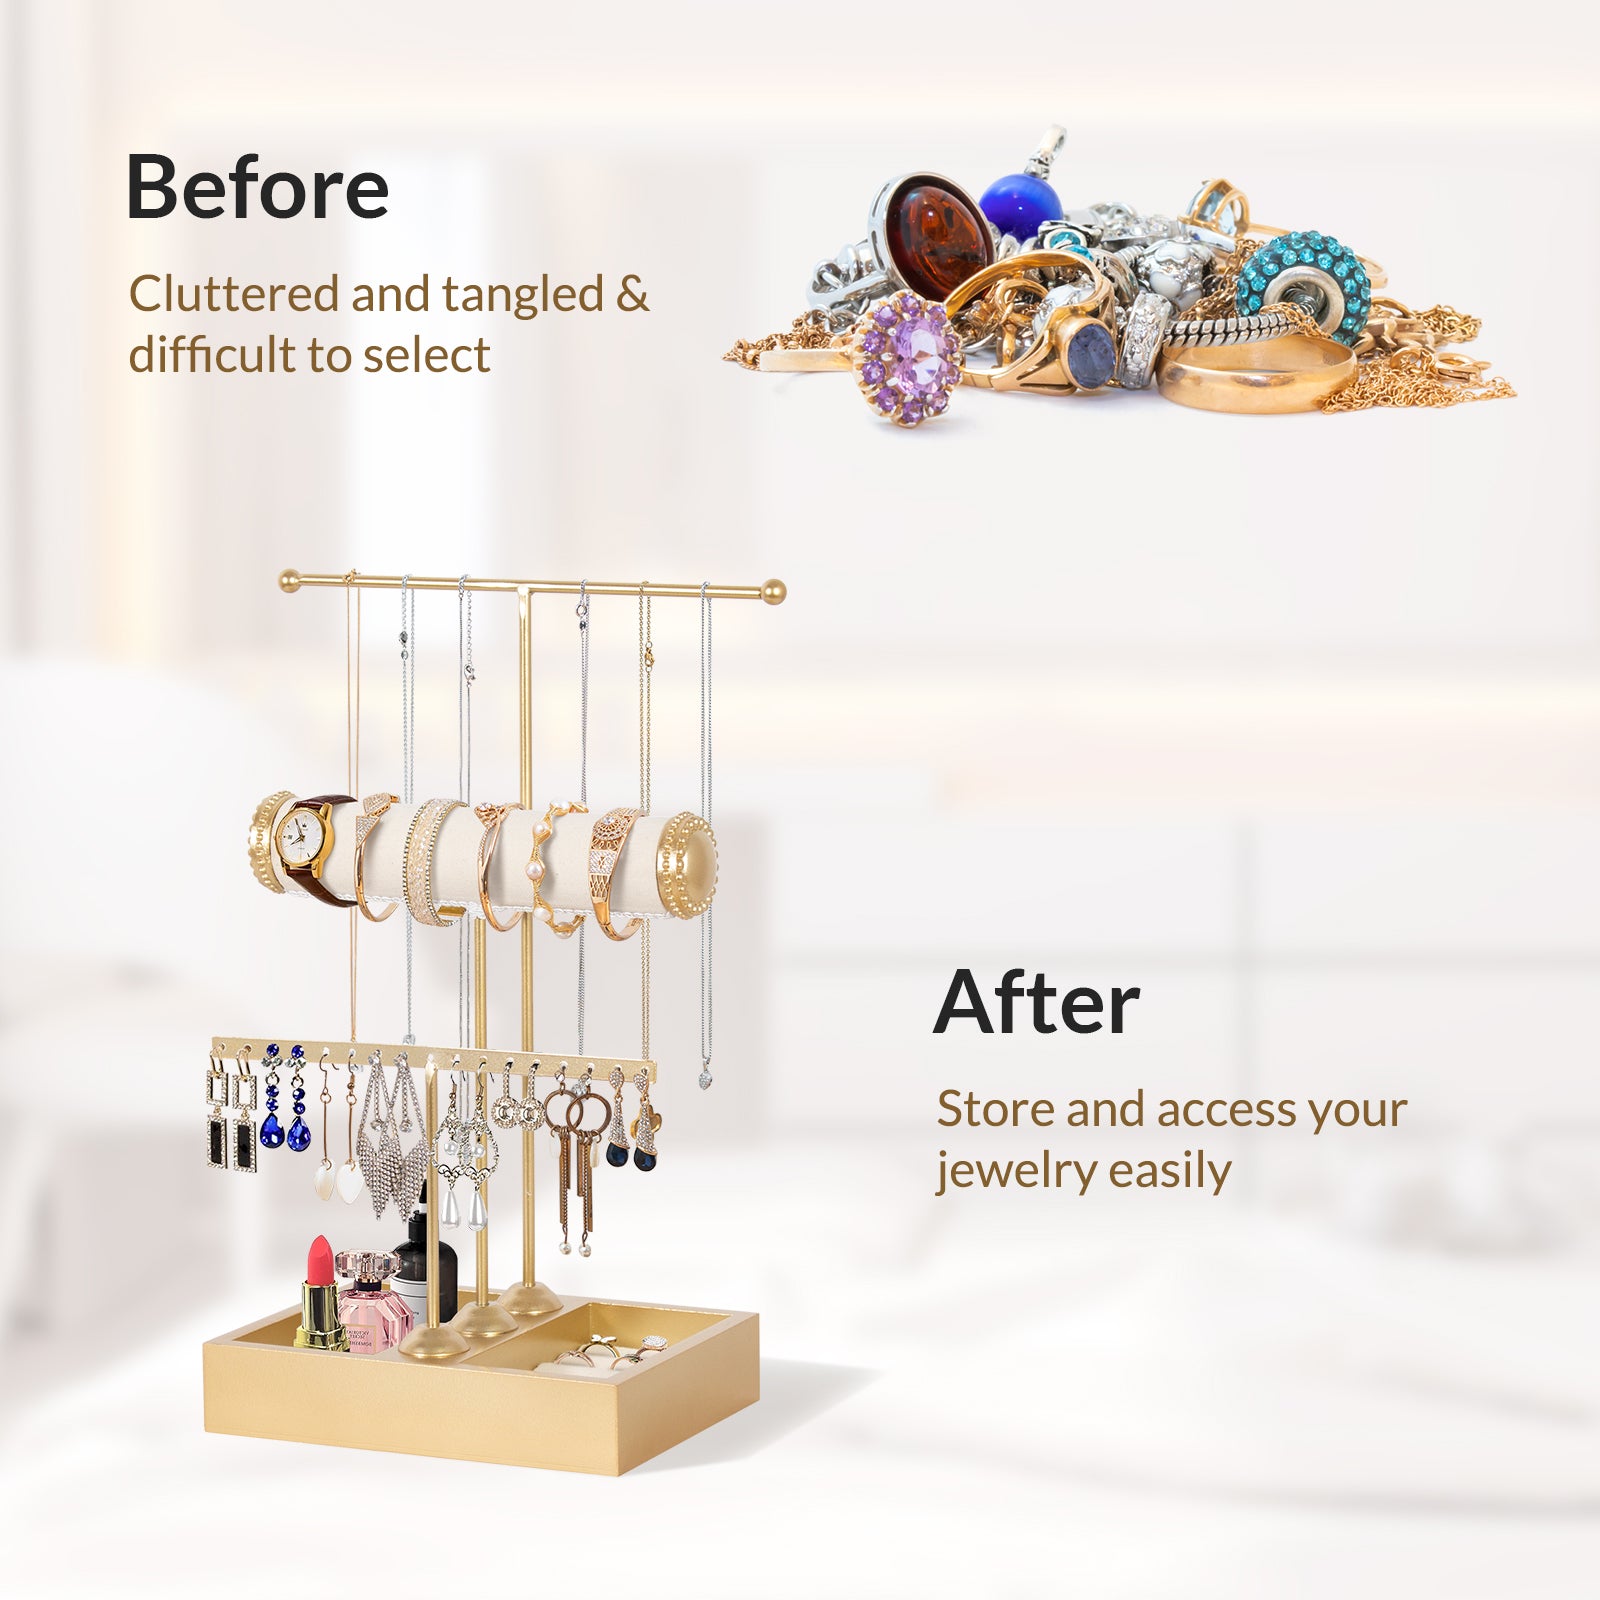 Jewelry-Holder-Jewelry-Display-Stand-Gold-3-Tier-Jewelry-Tree-Stand-with-Tray-for-Necklaces-Rings-Earrings-Bracelets-Watches-and-Accessories-Gold